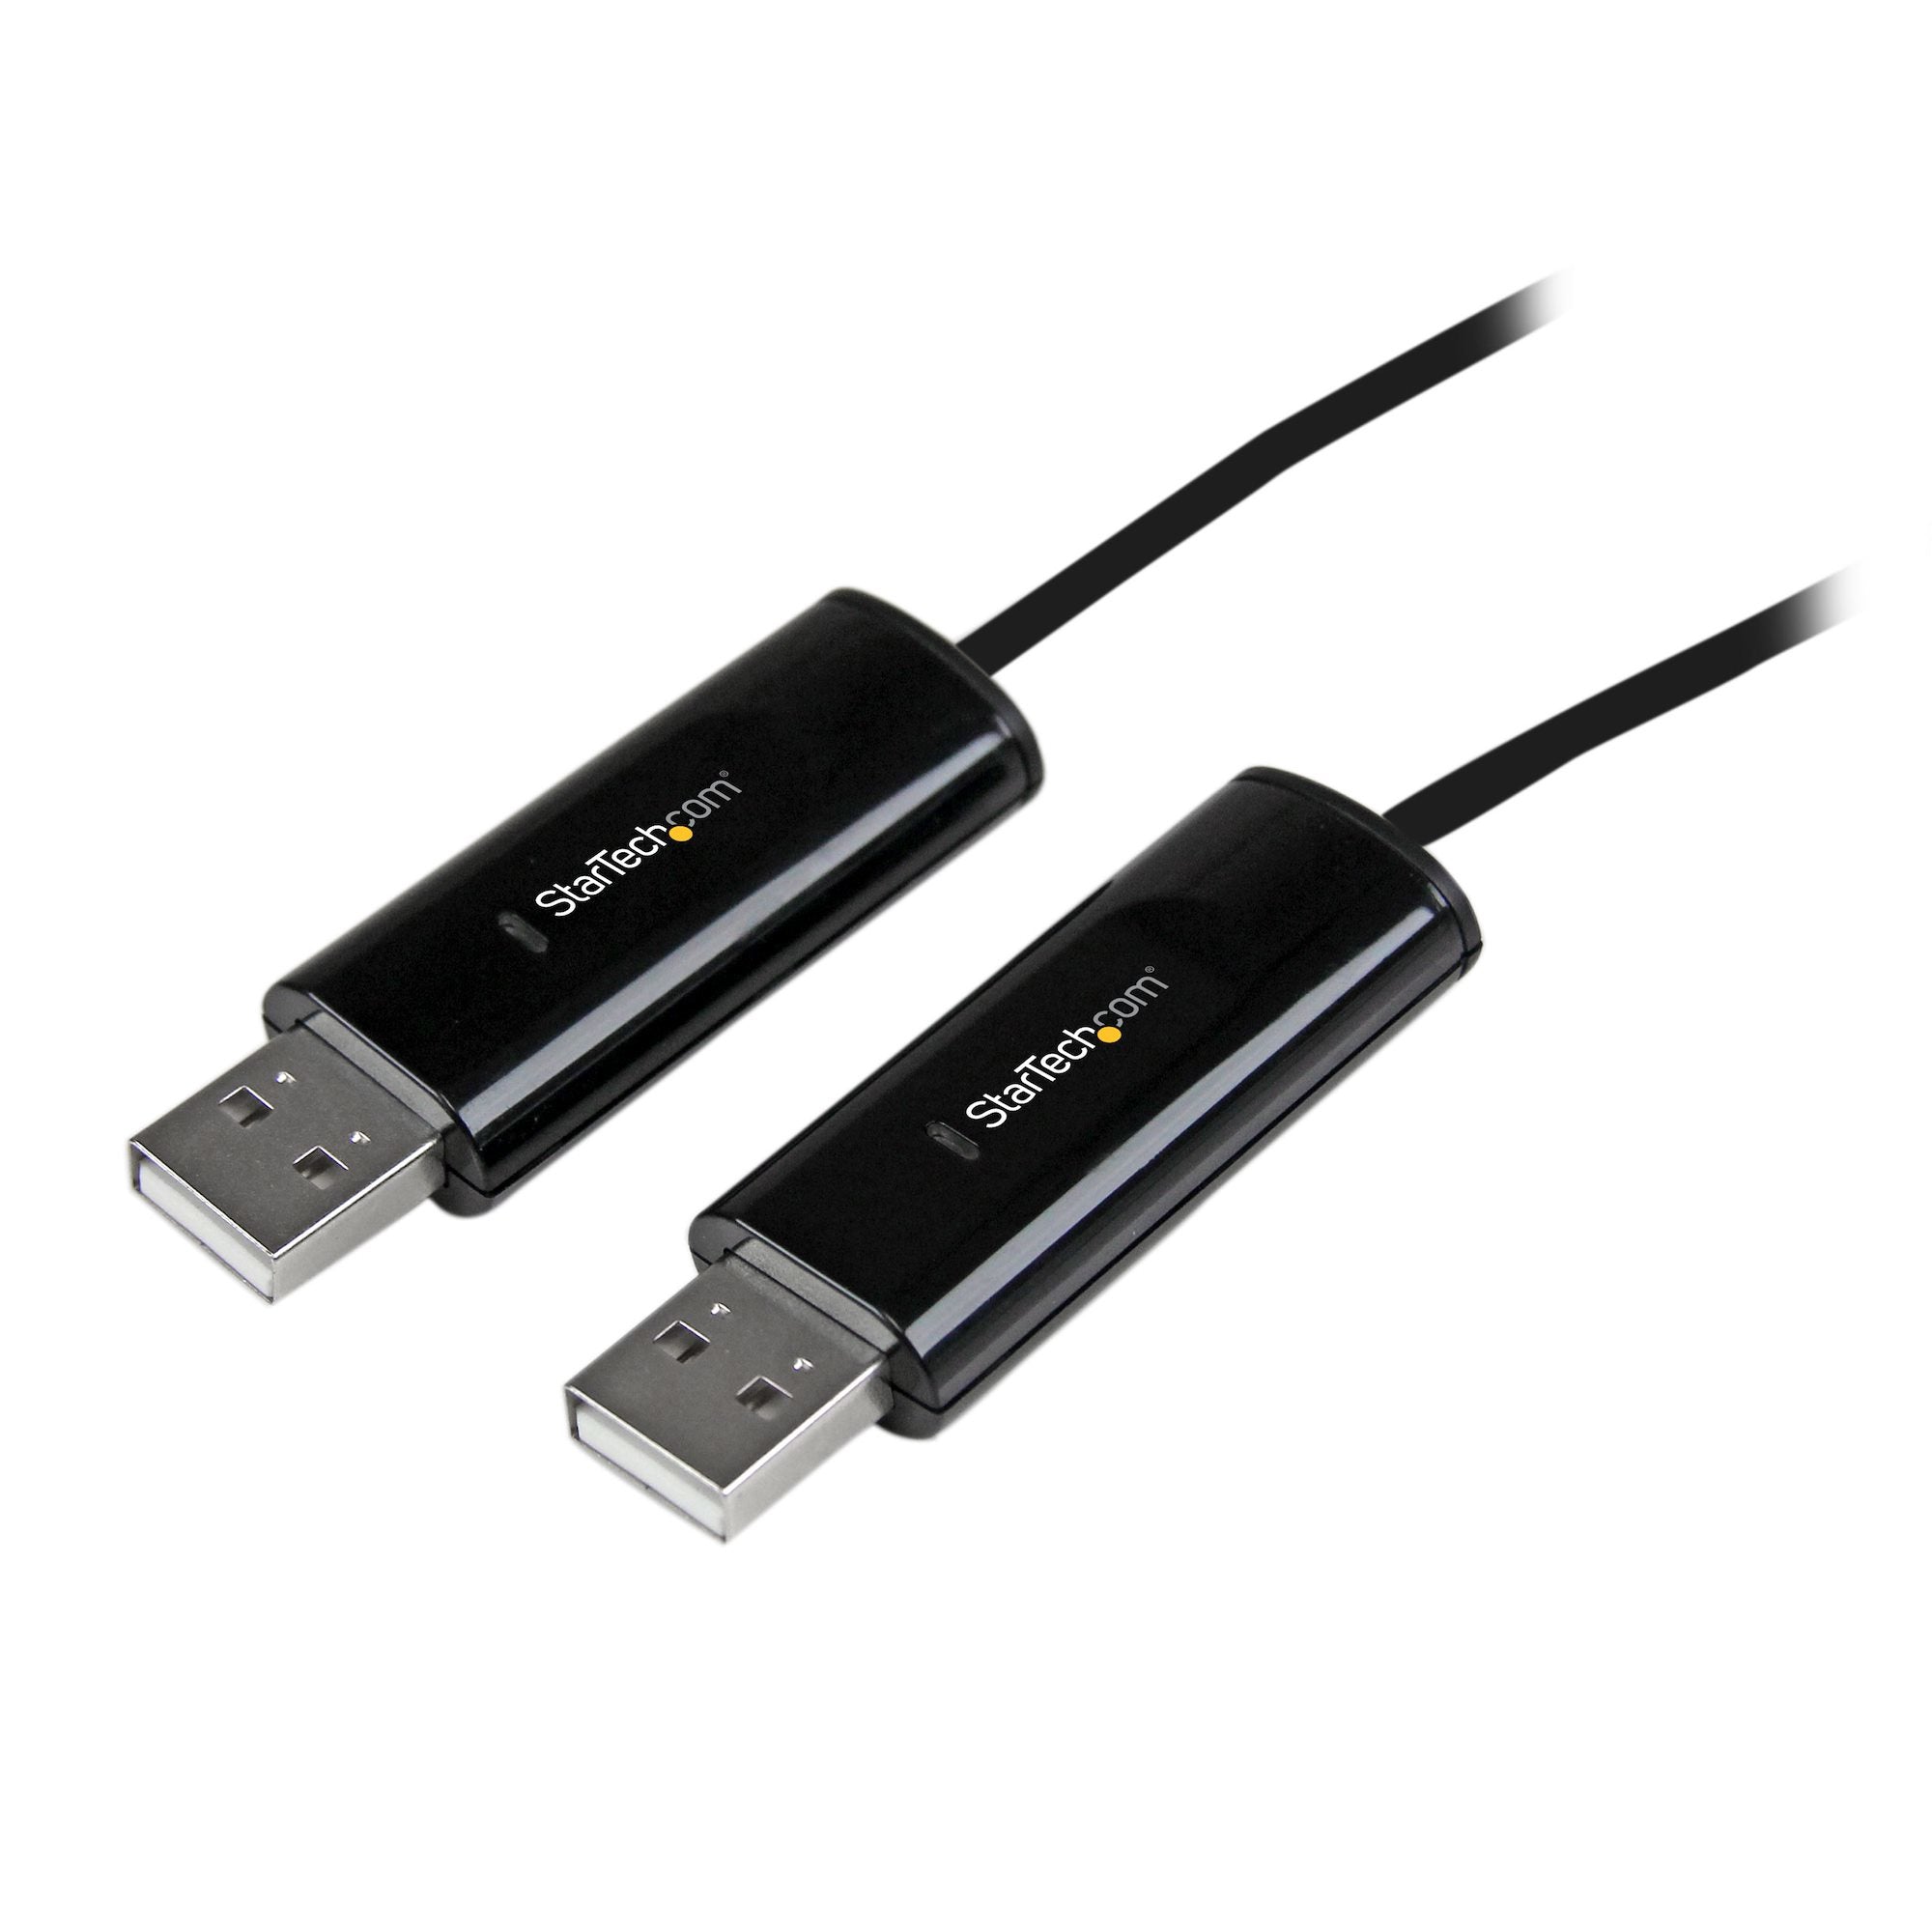 StarTech.com KM Switch Cable with File Transfer for Mac and PC - USB 2.0